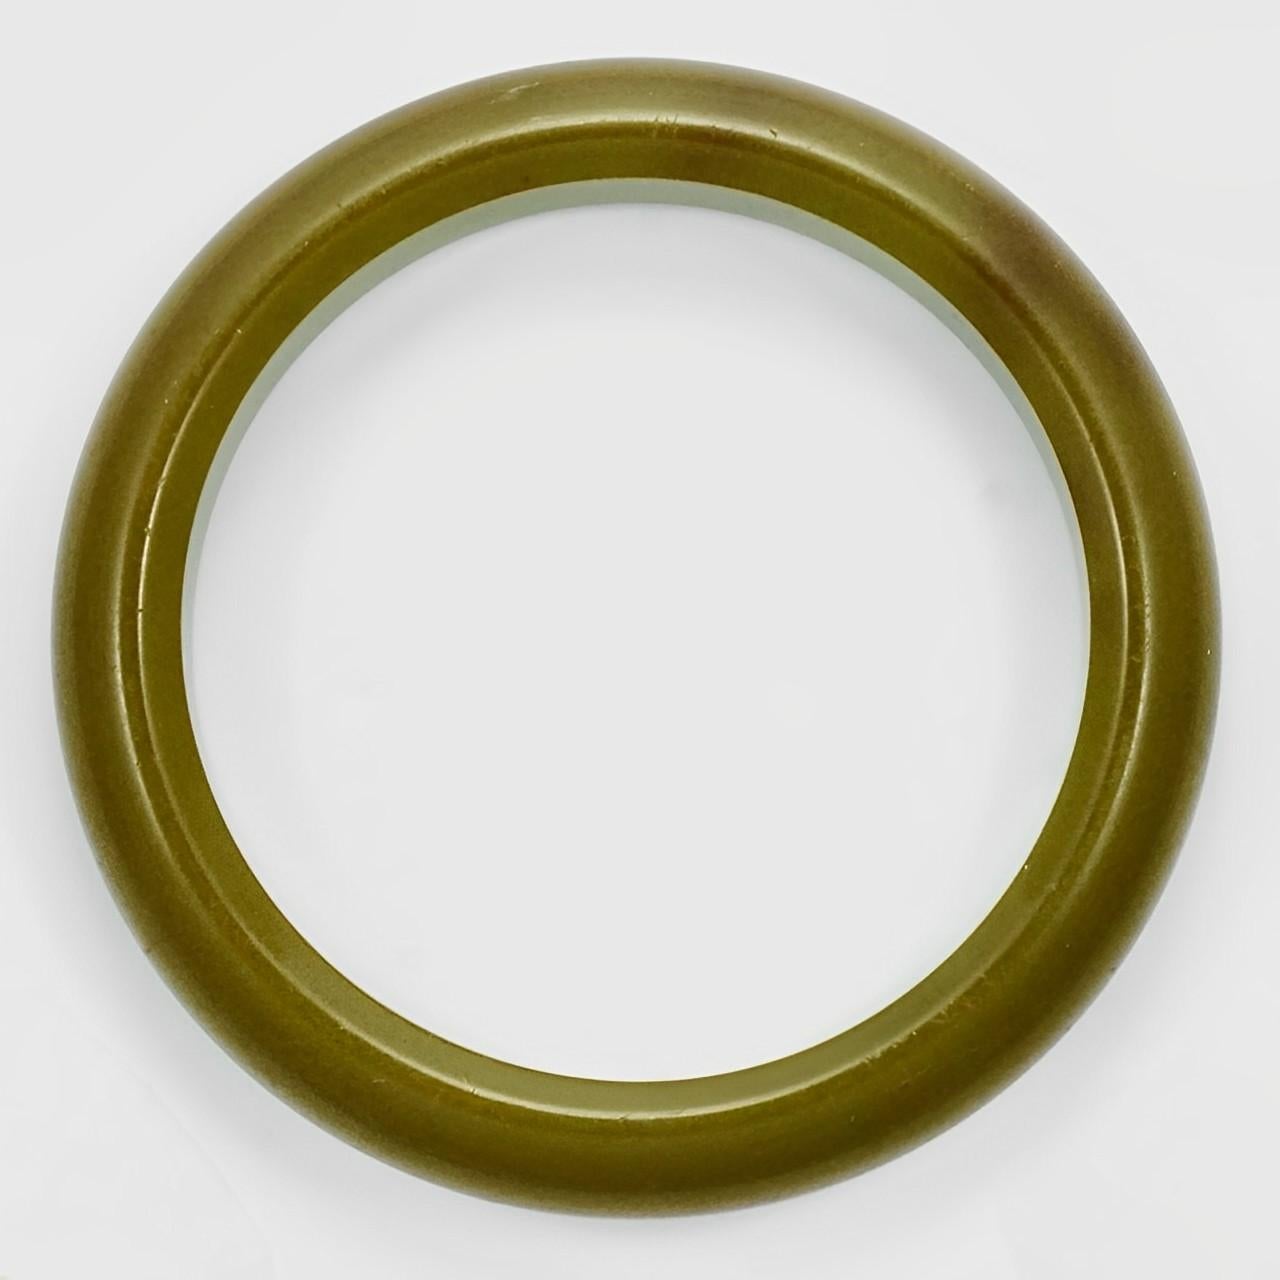 Lovely olive green Bakelite bangle bracelet. Inside diameter 6.5 cm / 2.5 inches by width 9 mm / .35 inch. The bangle has some scratching.

This is a wonderful classic Bakelite bangle, circa 1930s.